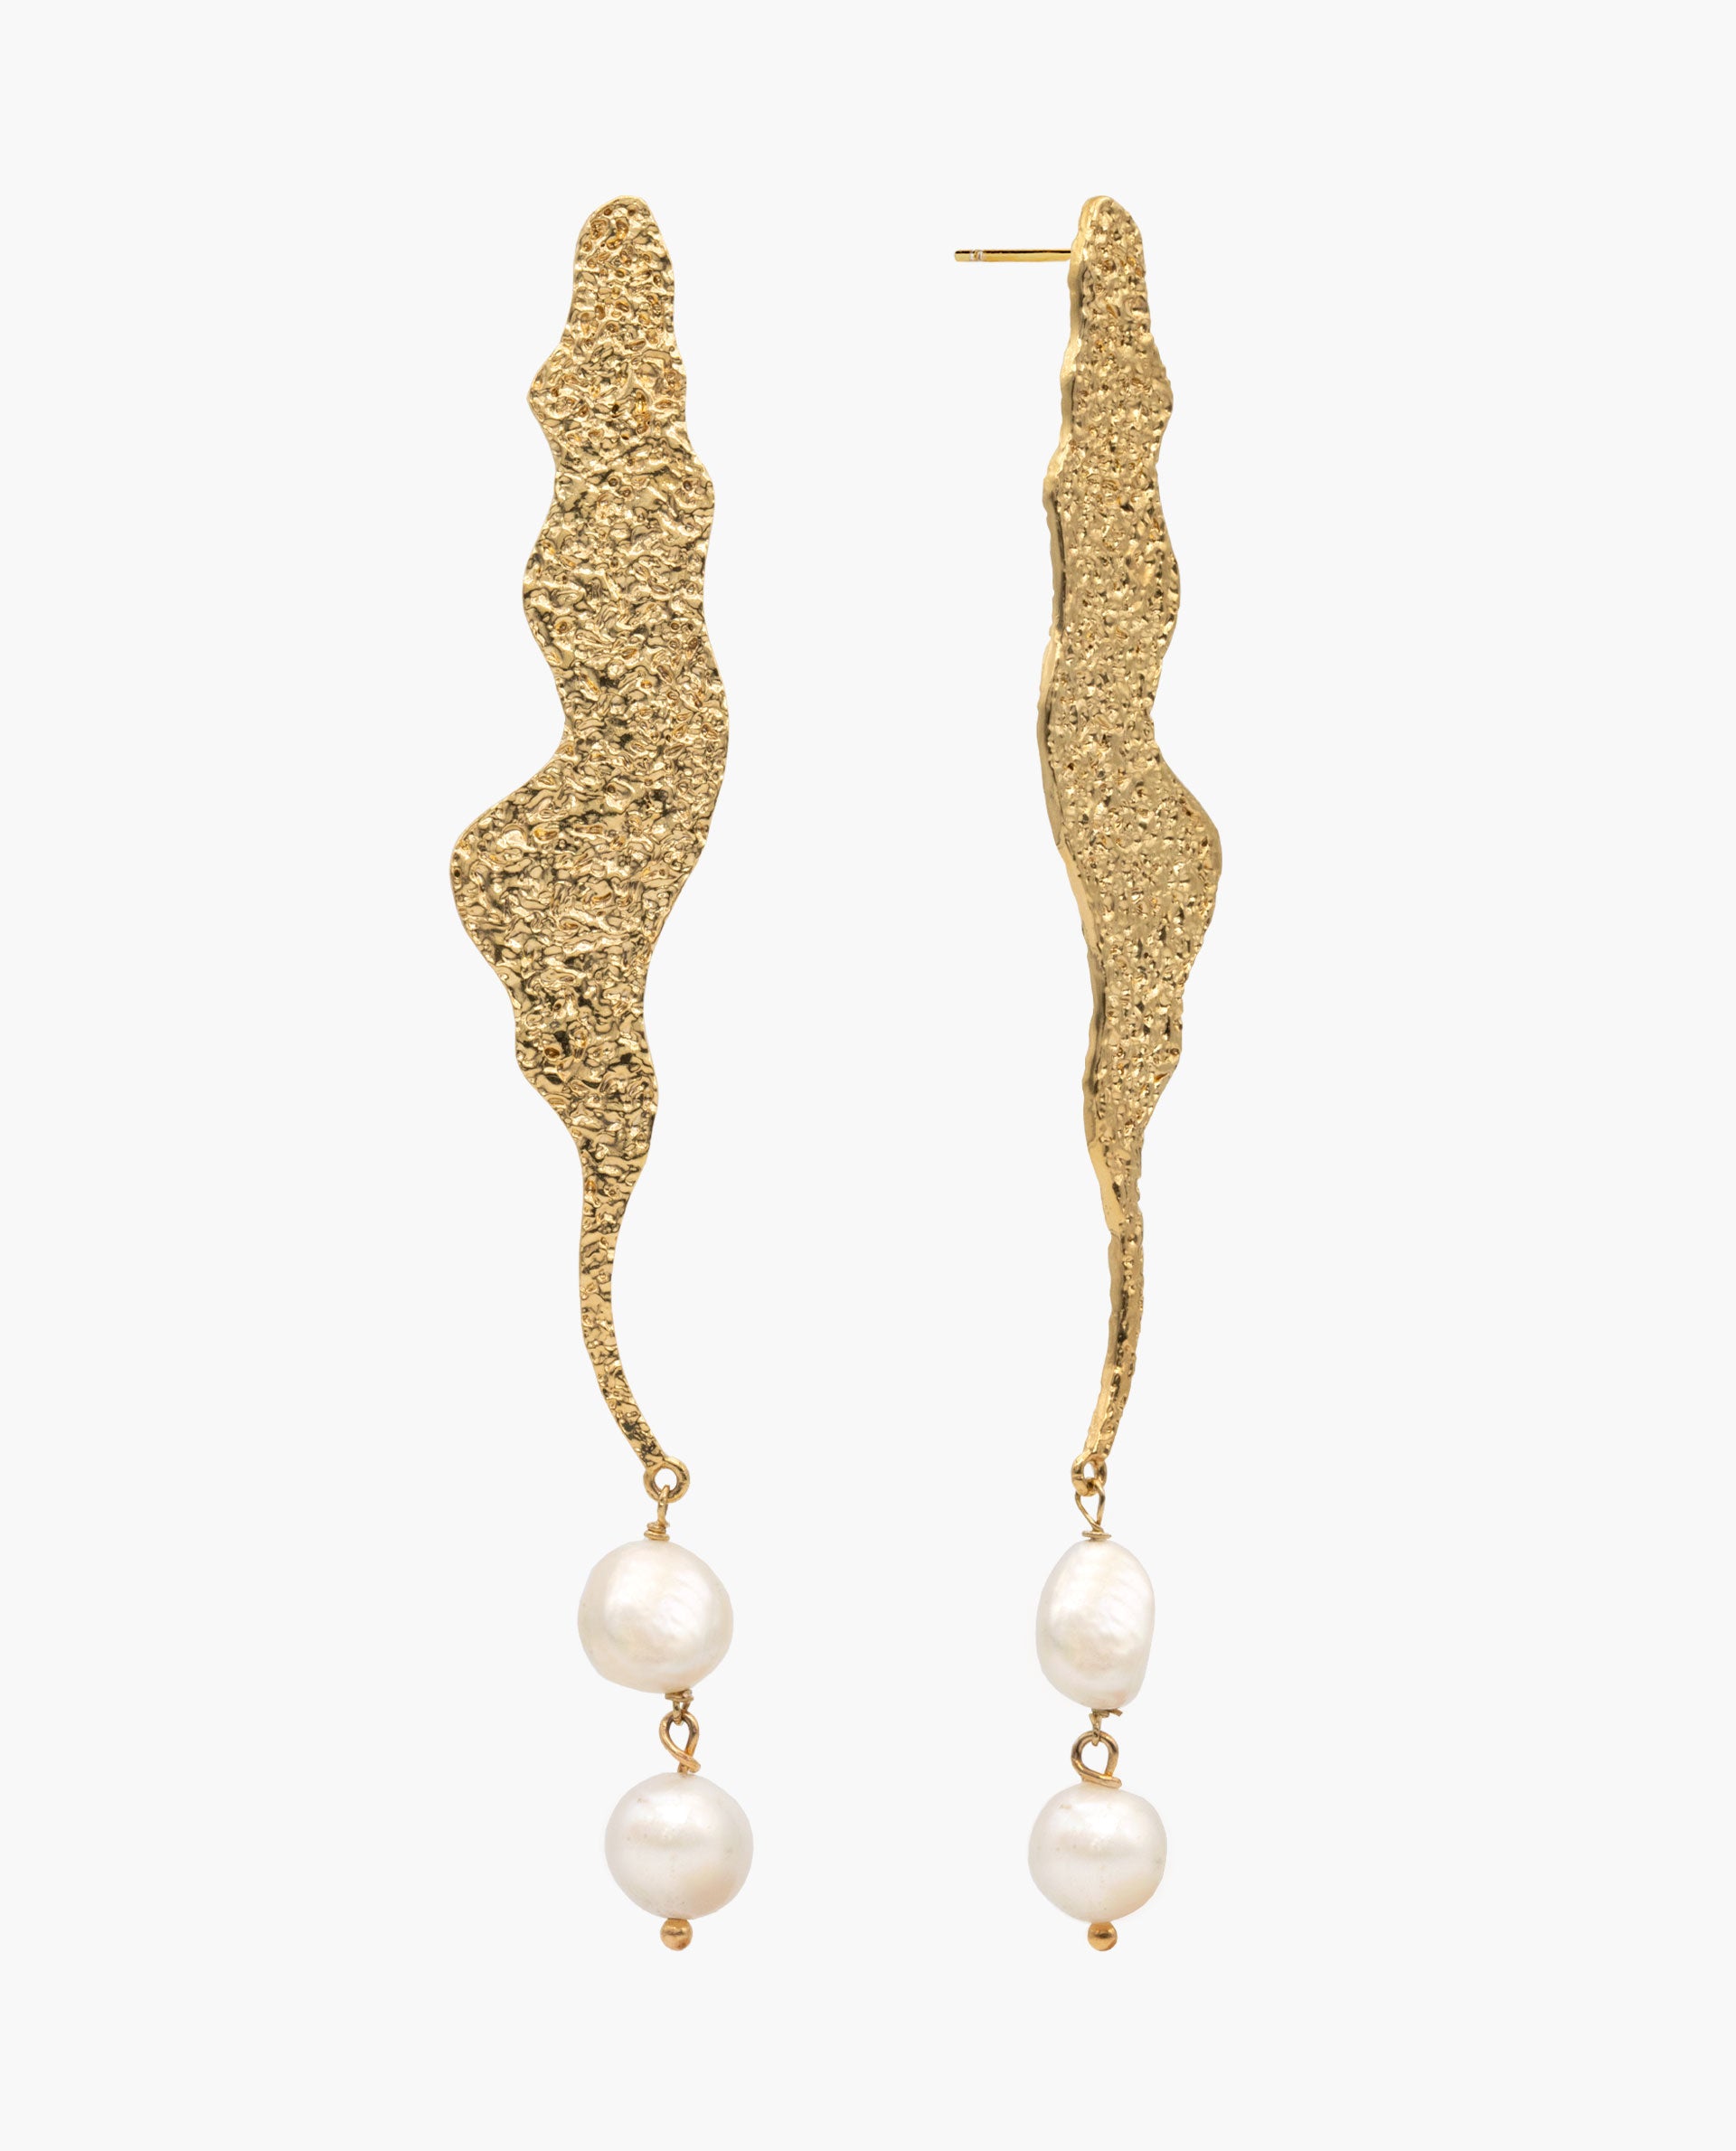 SACRED PEARLS EARRINGS - GOLD PLATED